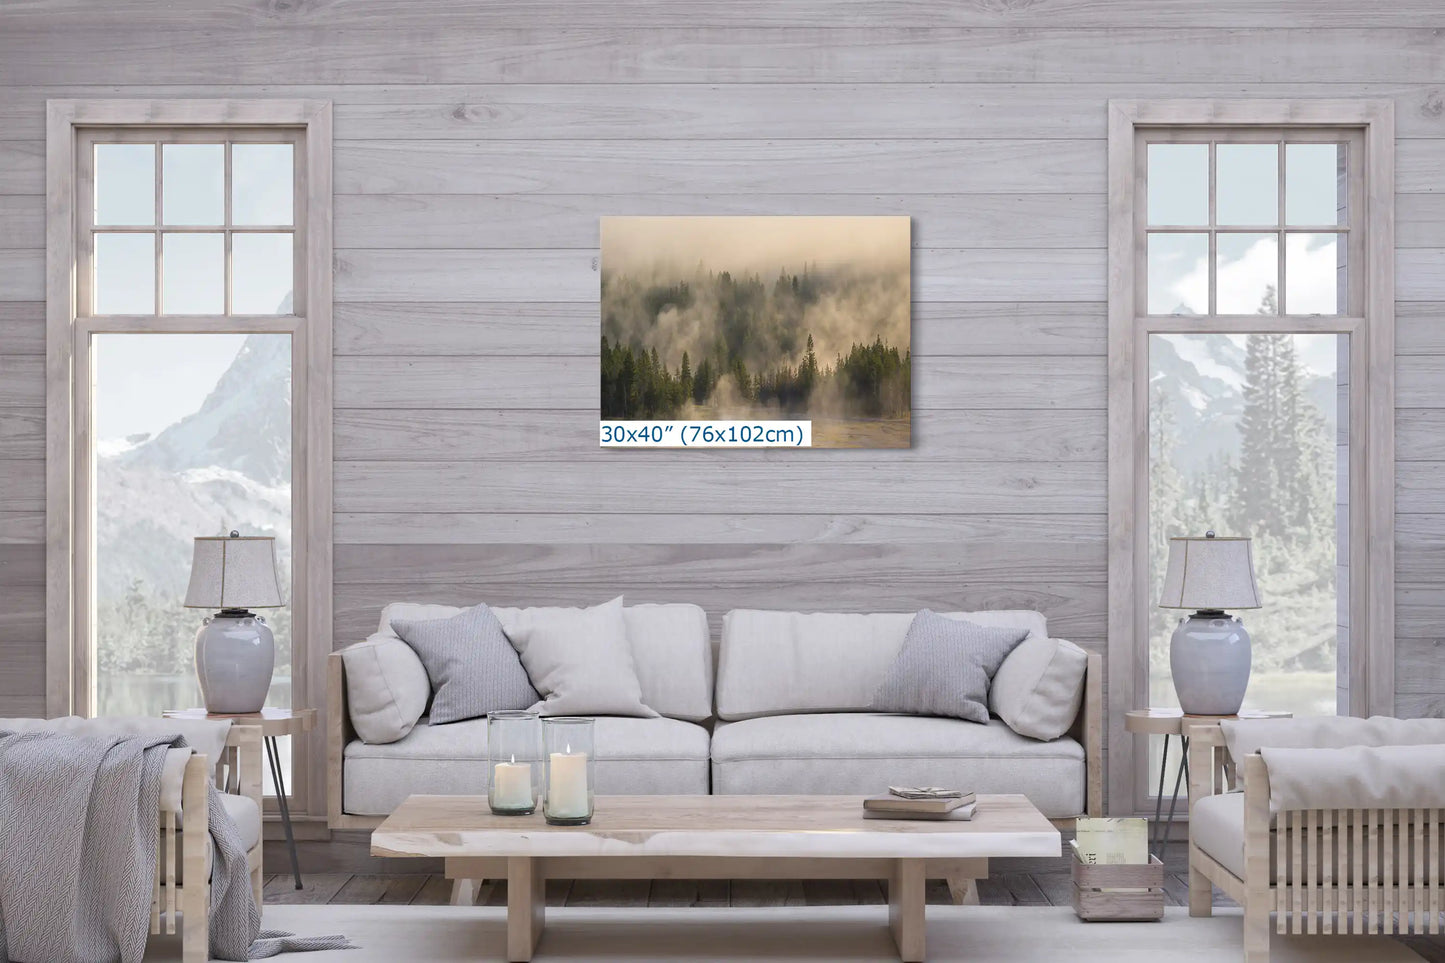 A 30x40 canvas print of Yellowstone's foggy forest in a cozy living room setting, ideal for creating a calming ambiance.